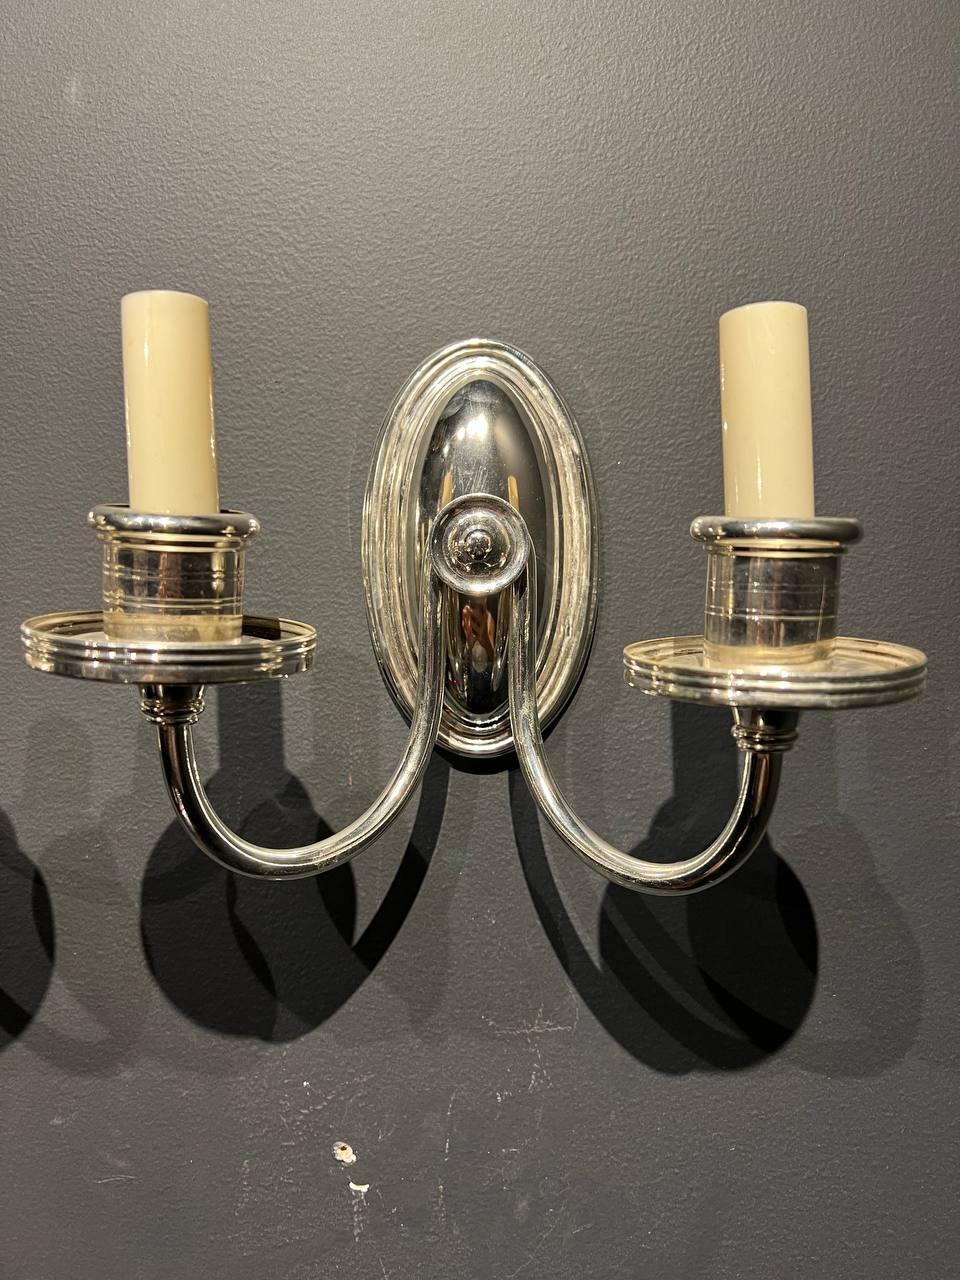 A circa 1920s Caldwell silver plated bronze sconces with two arms